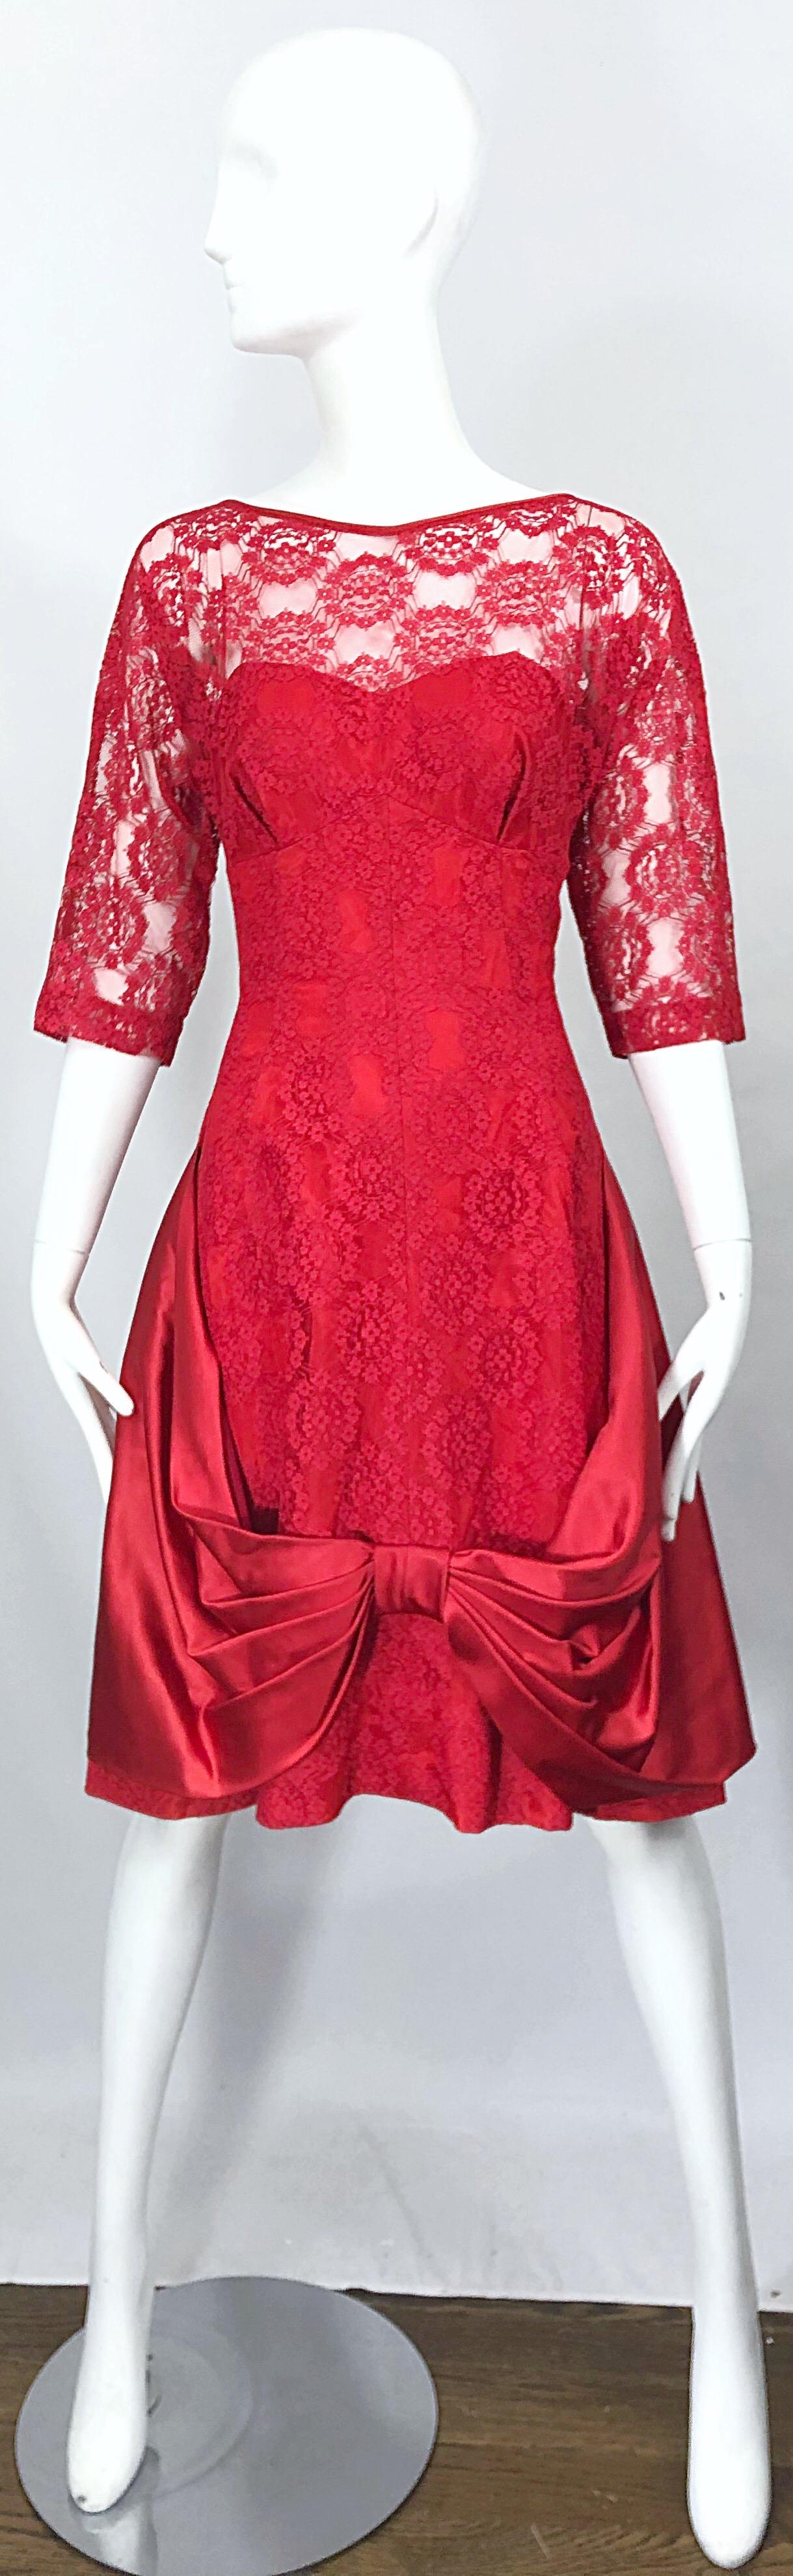 1950s Demi Couture Lips Stick Red Silk Lace 3/4 Sleeve Vintage 50s Dress For Sale 7